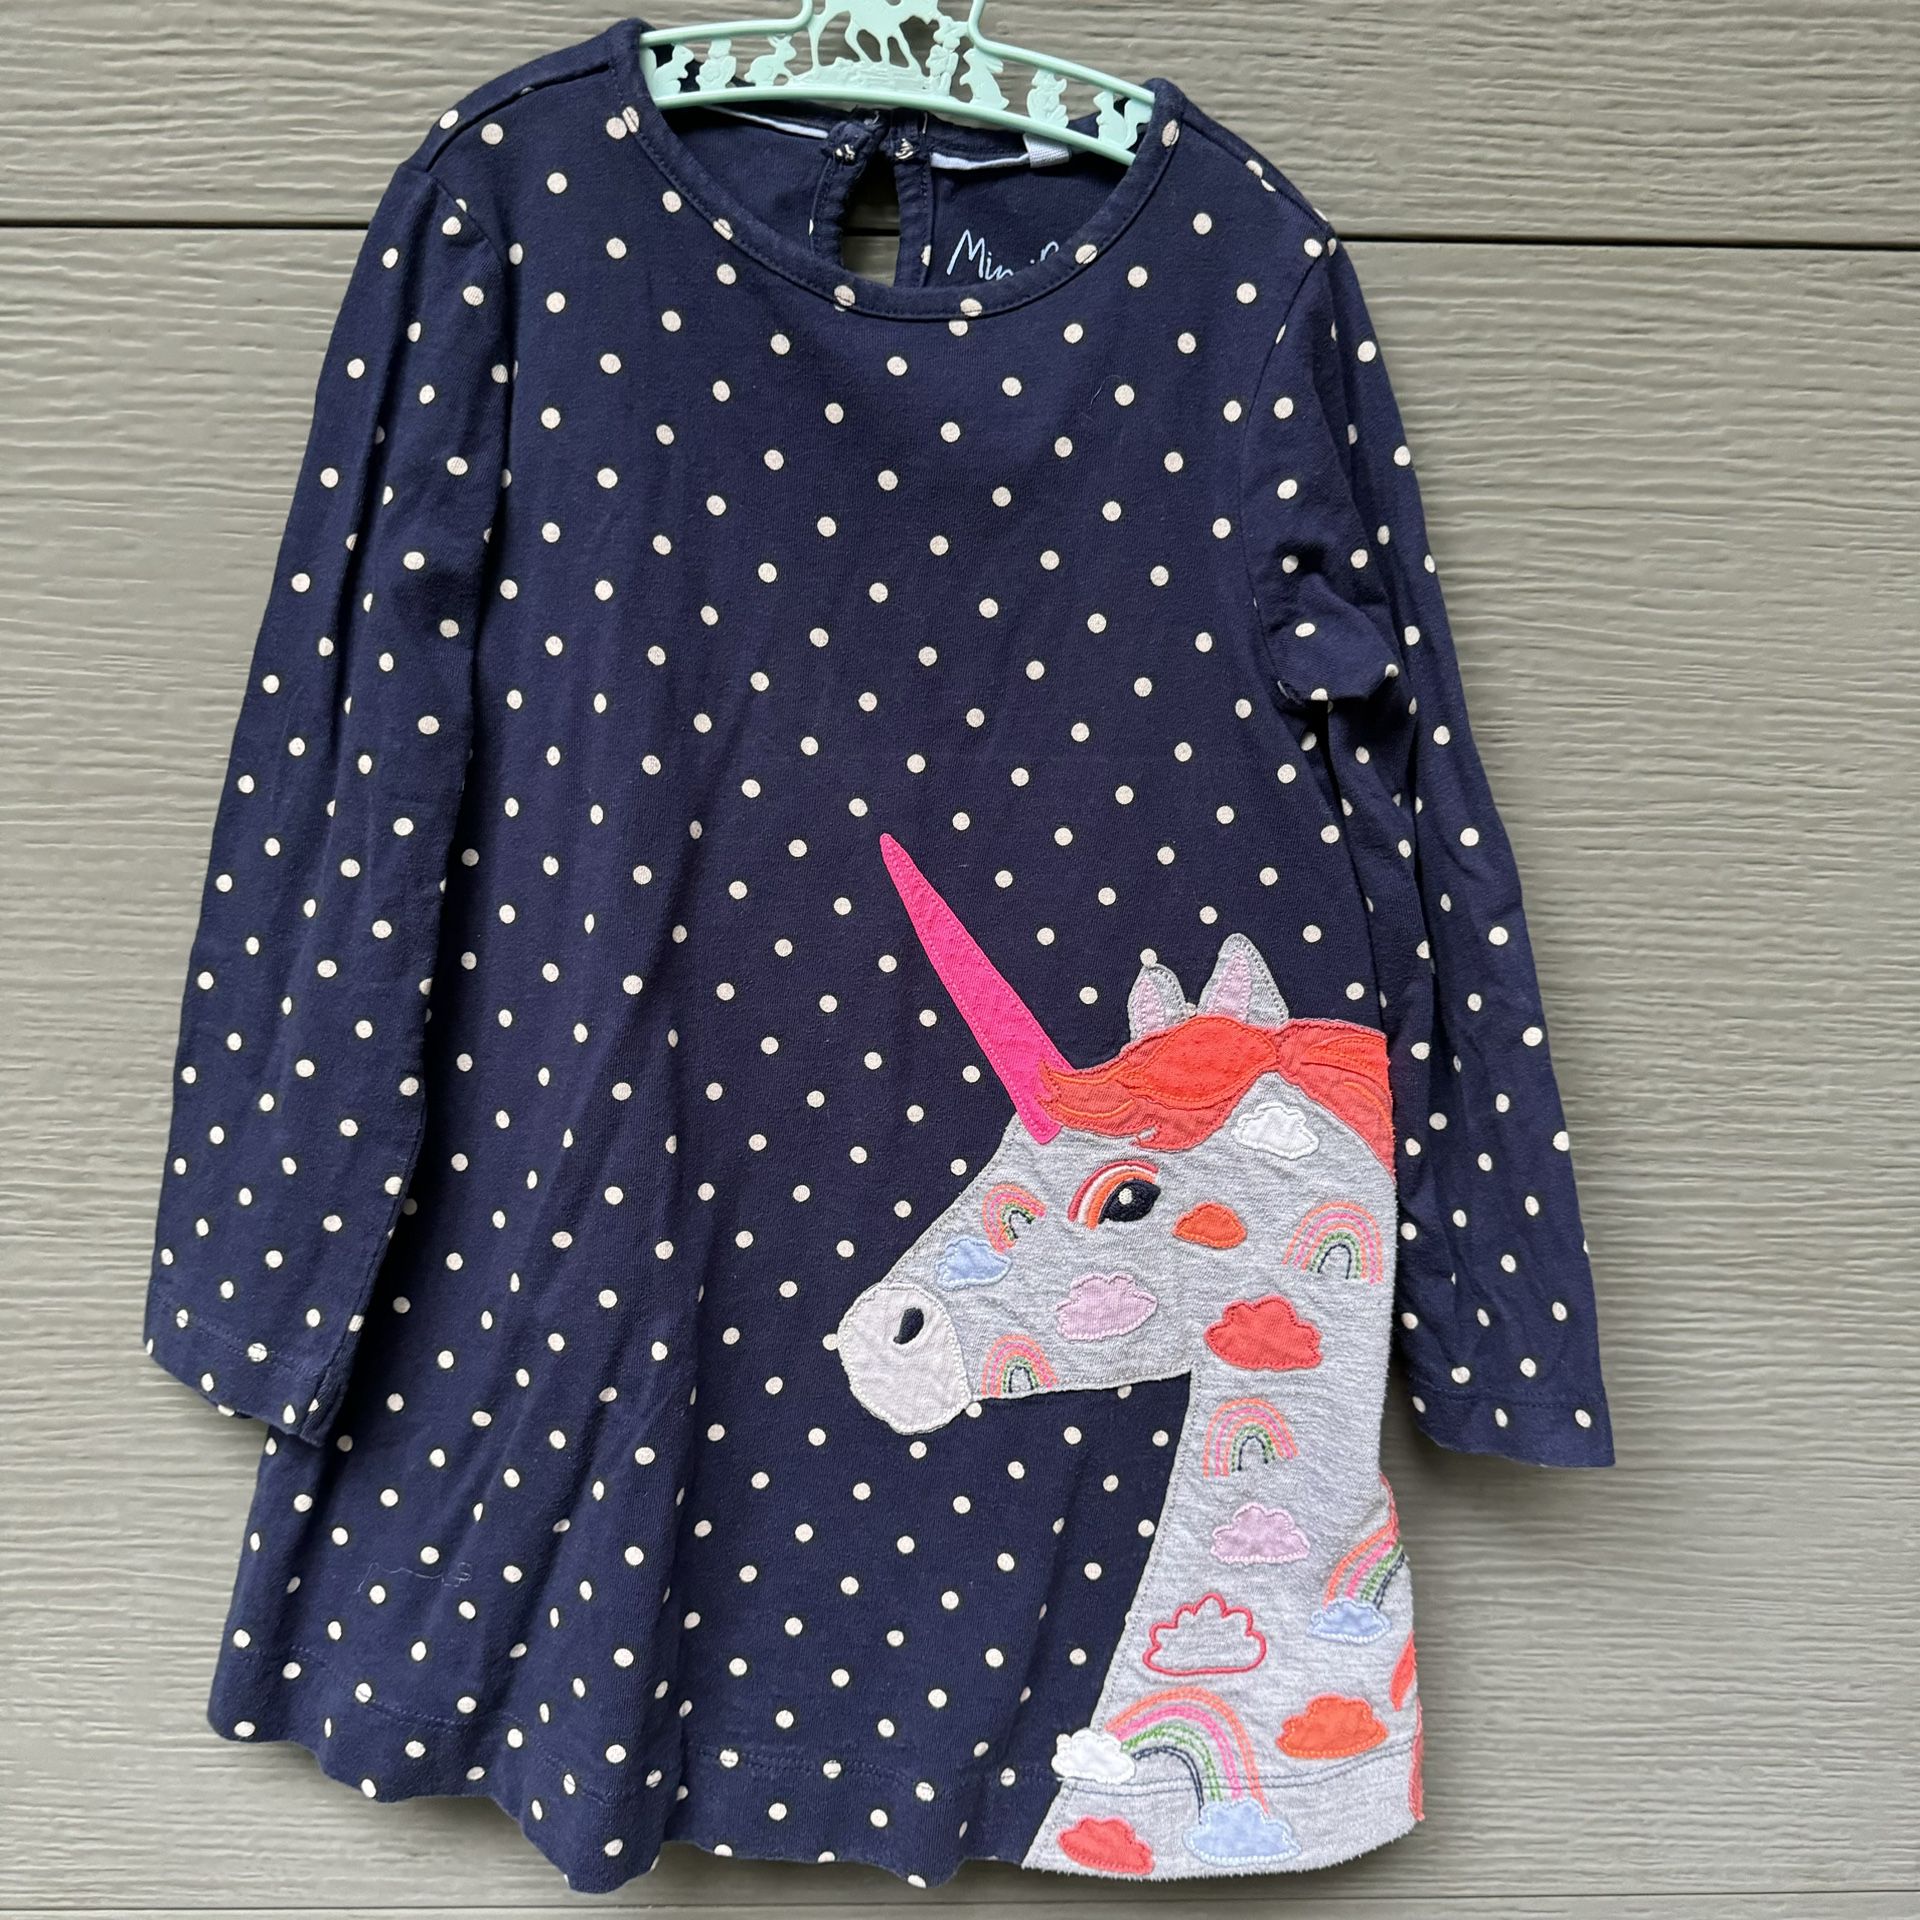 Mini Boden 2-3y unicorn applique dress on front and back